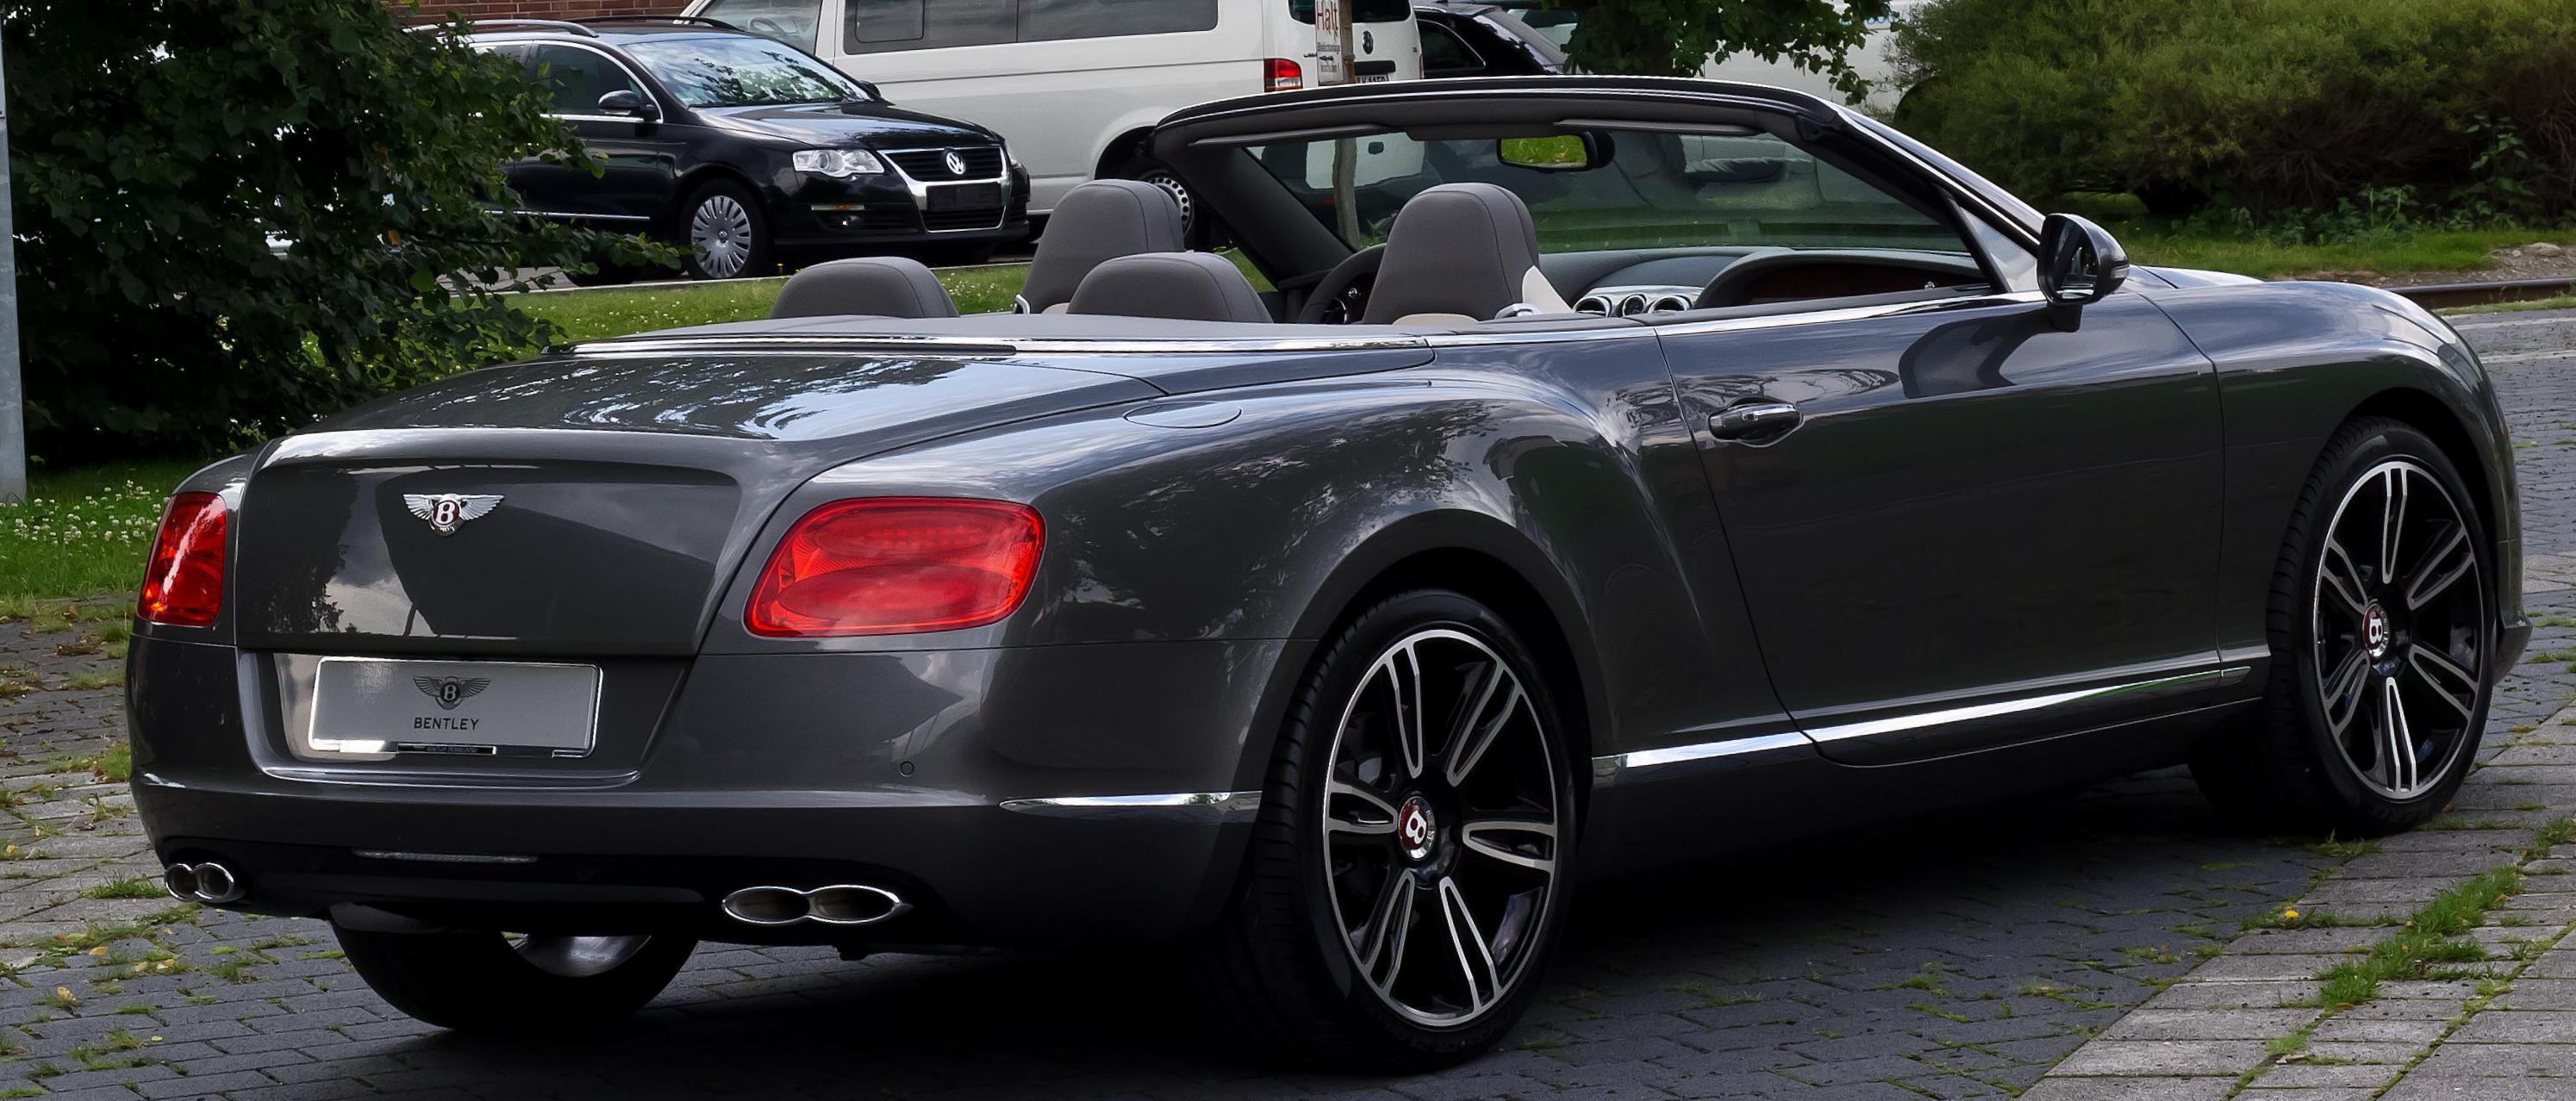 Continental GTC V8 Bentley for sale 2008